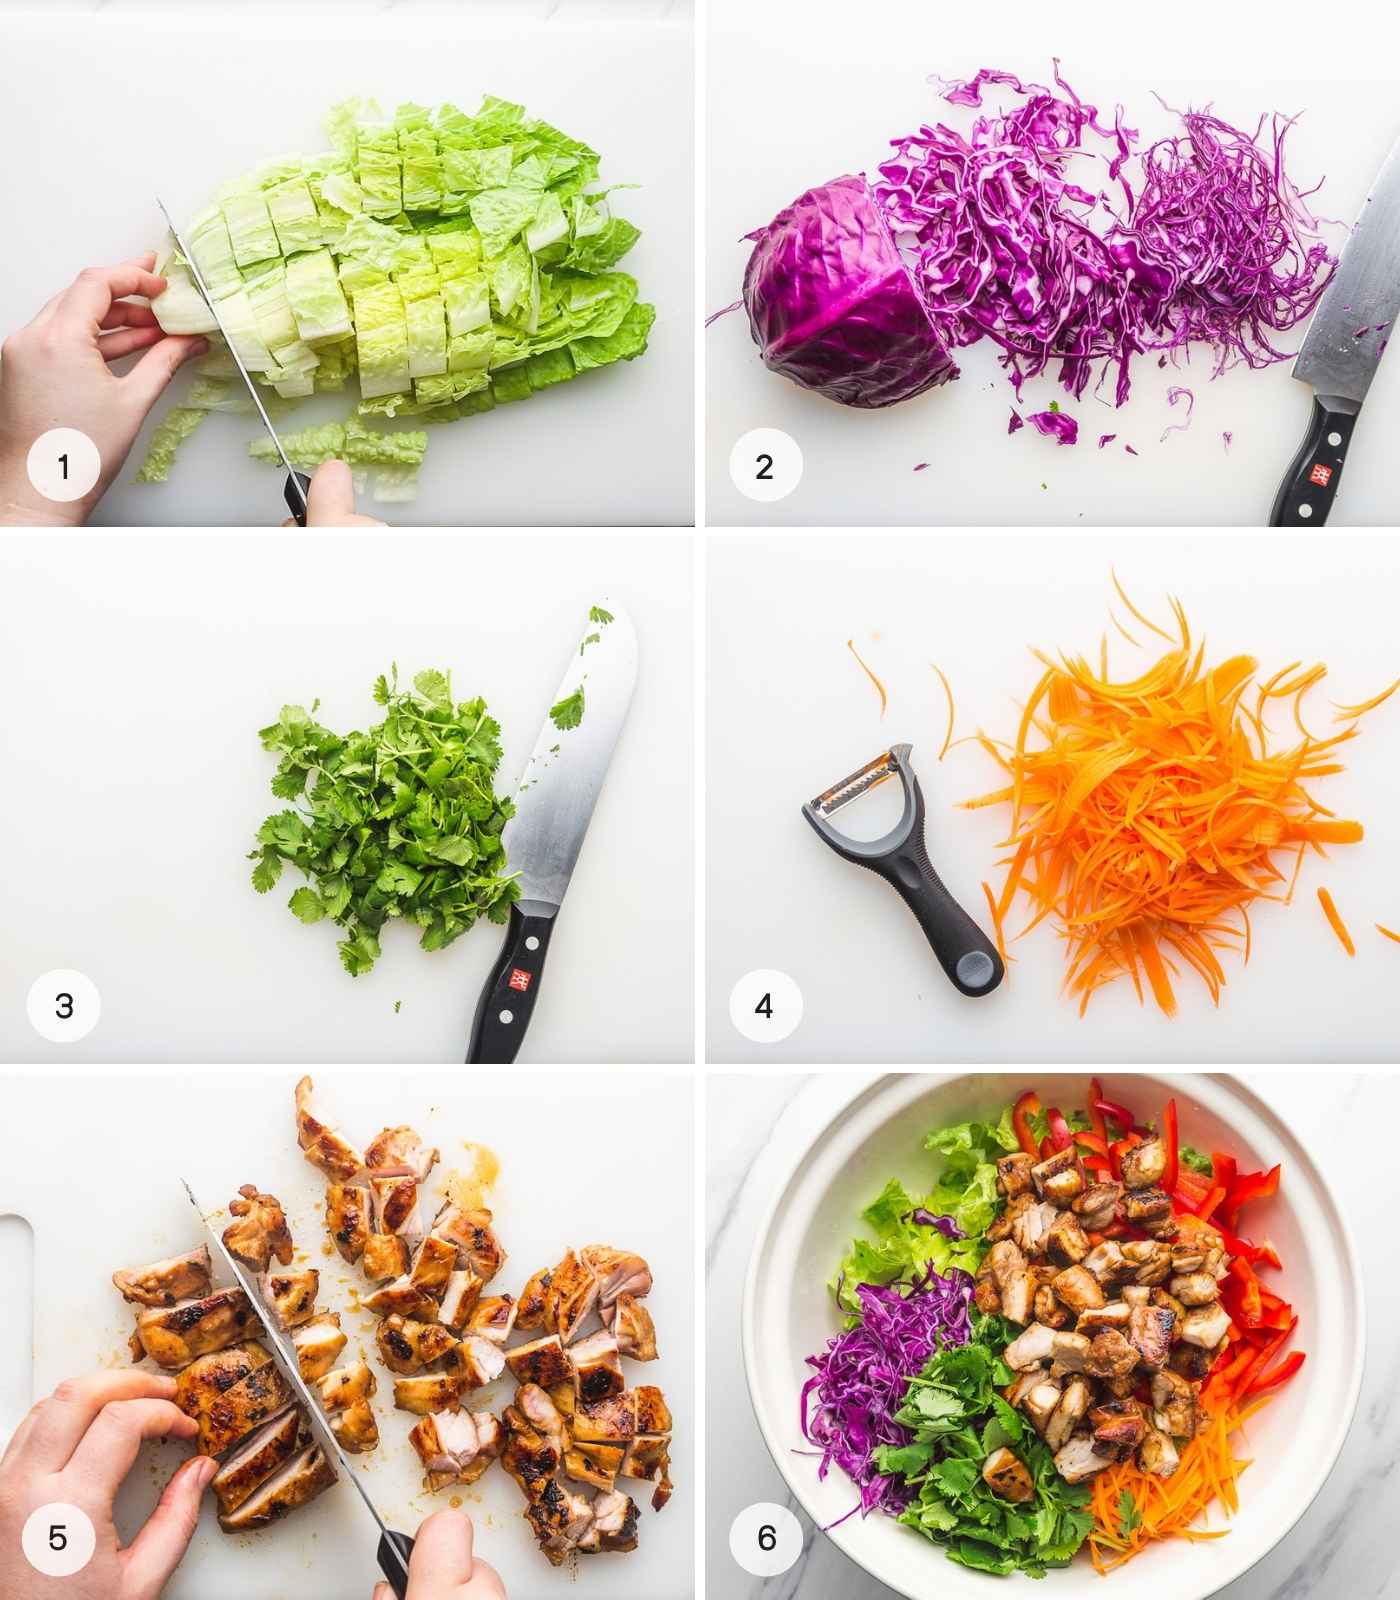 A collage with 6 images on how to make Asian chicken salad, from shredding the vegetables to chopping the chicken and making the salad.